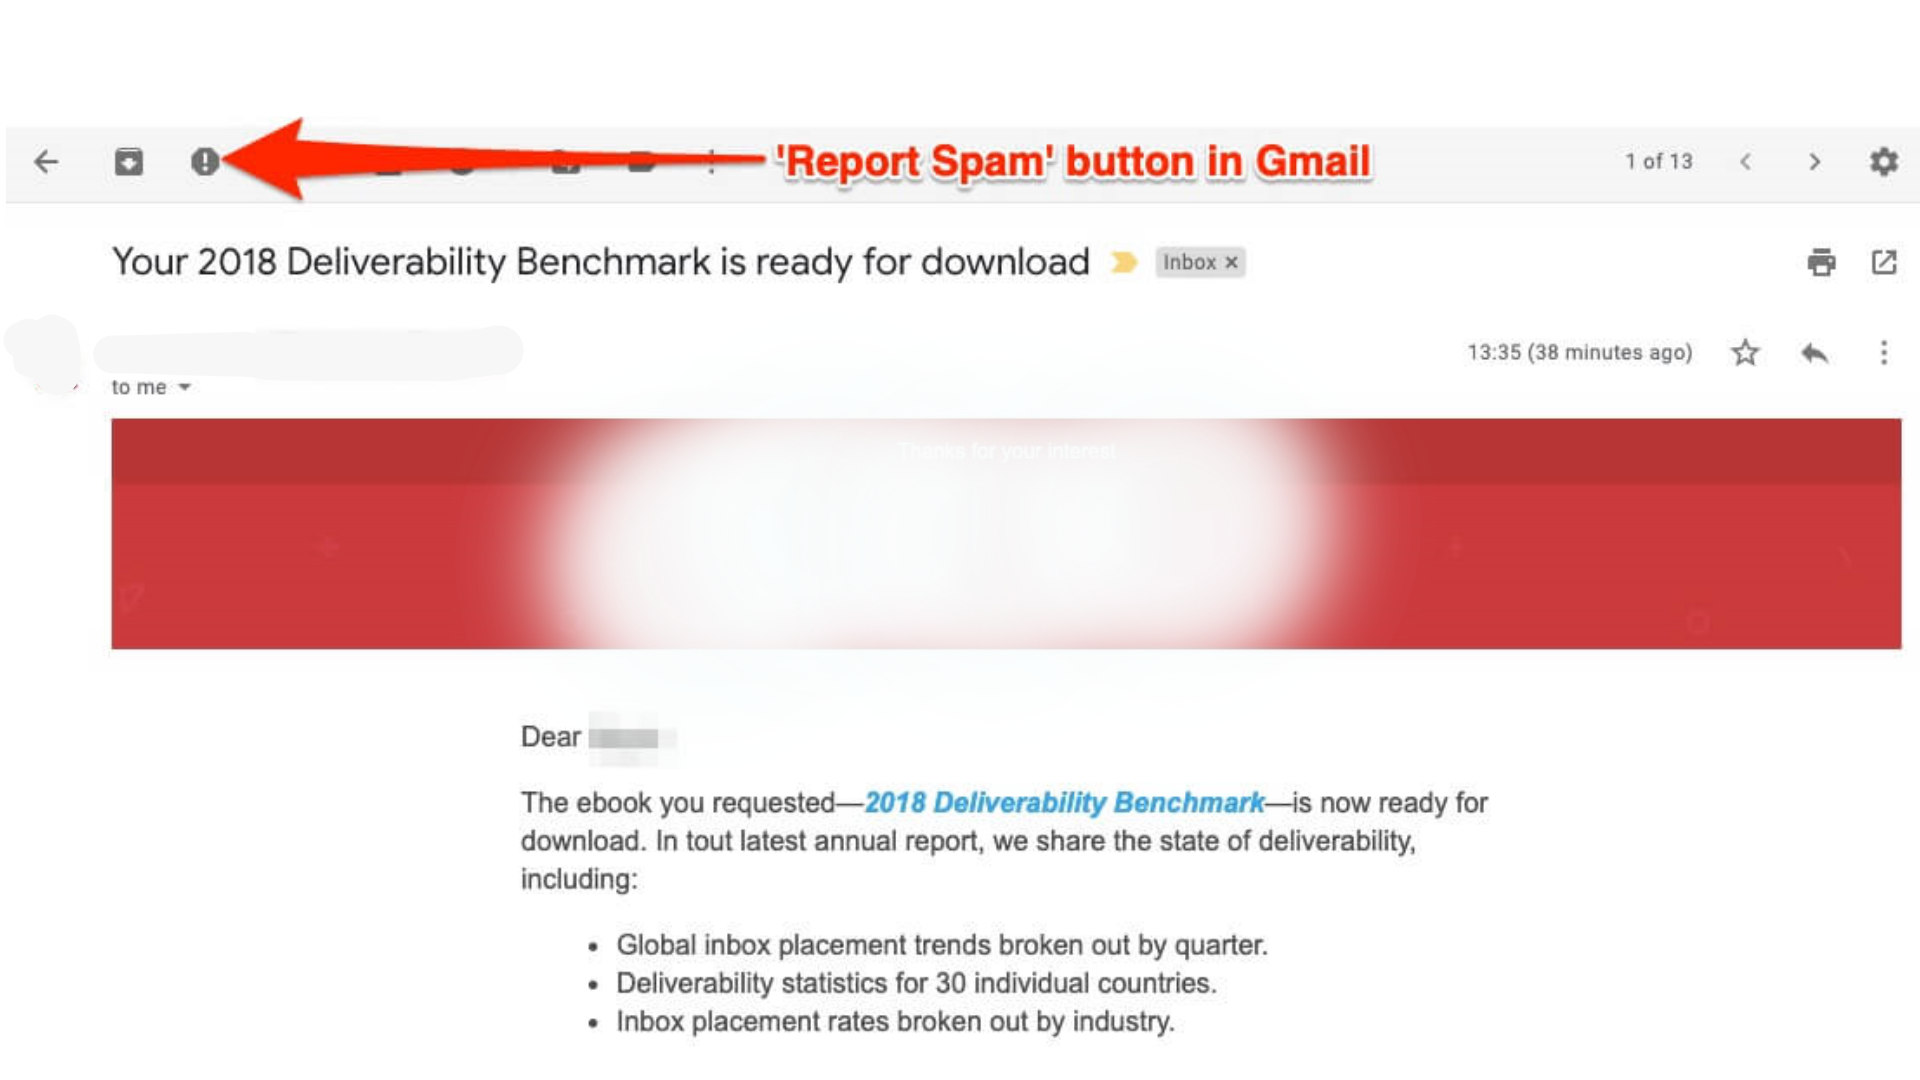 Reporting Spam in Gmail